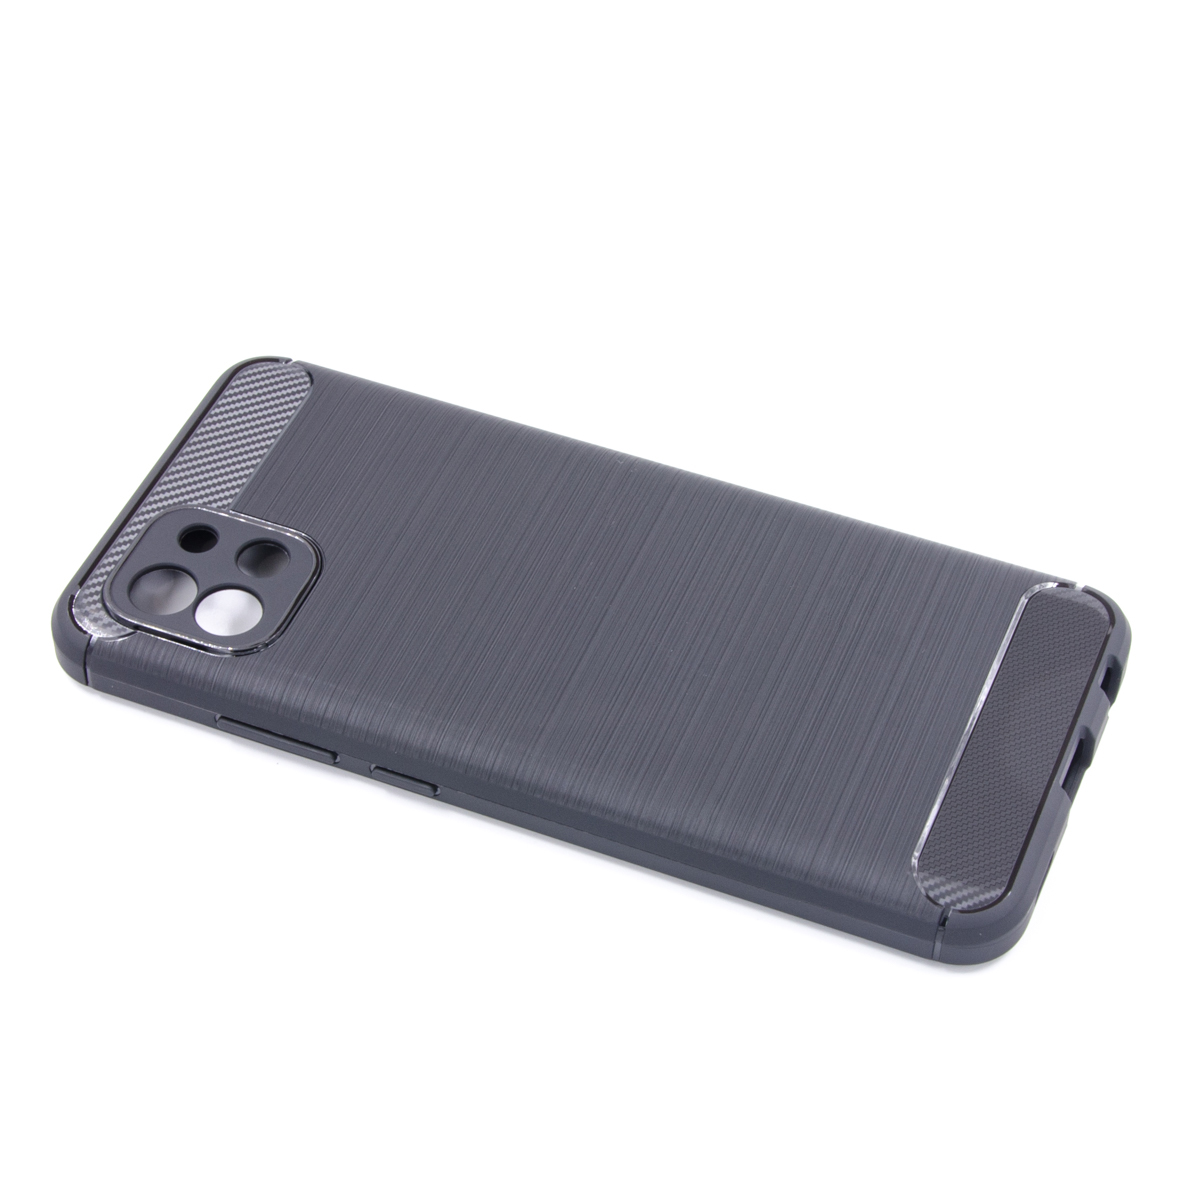 Tpu brushed new for sm-a035 (galaxy a03 4g) black 